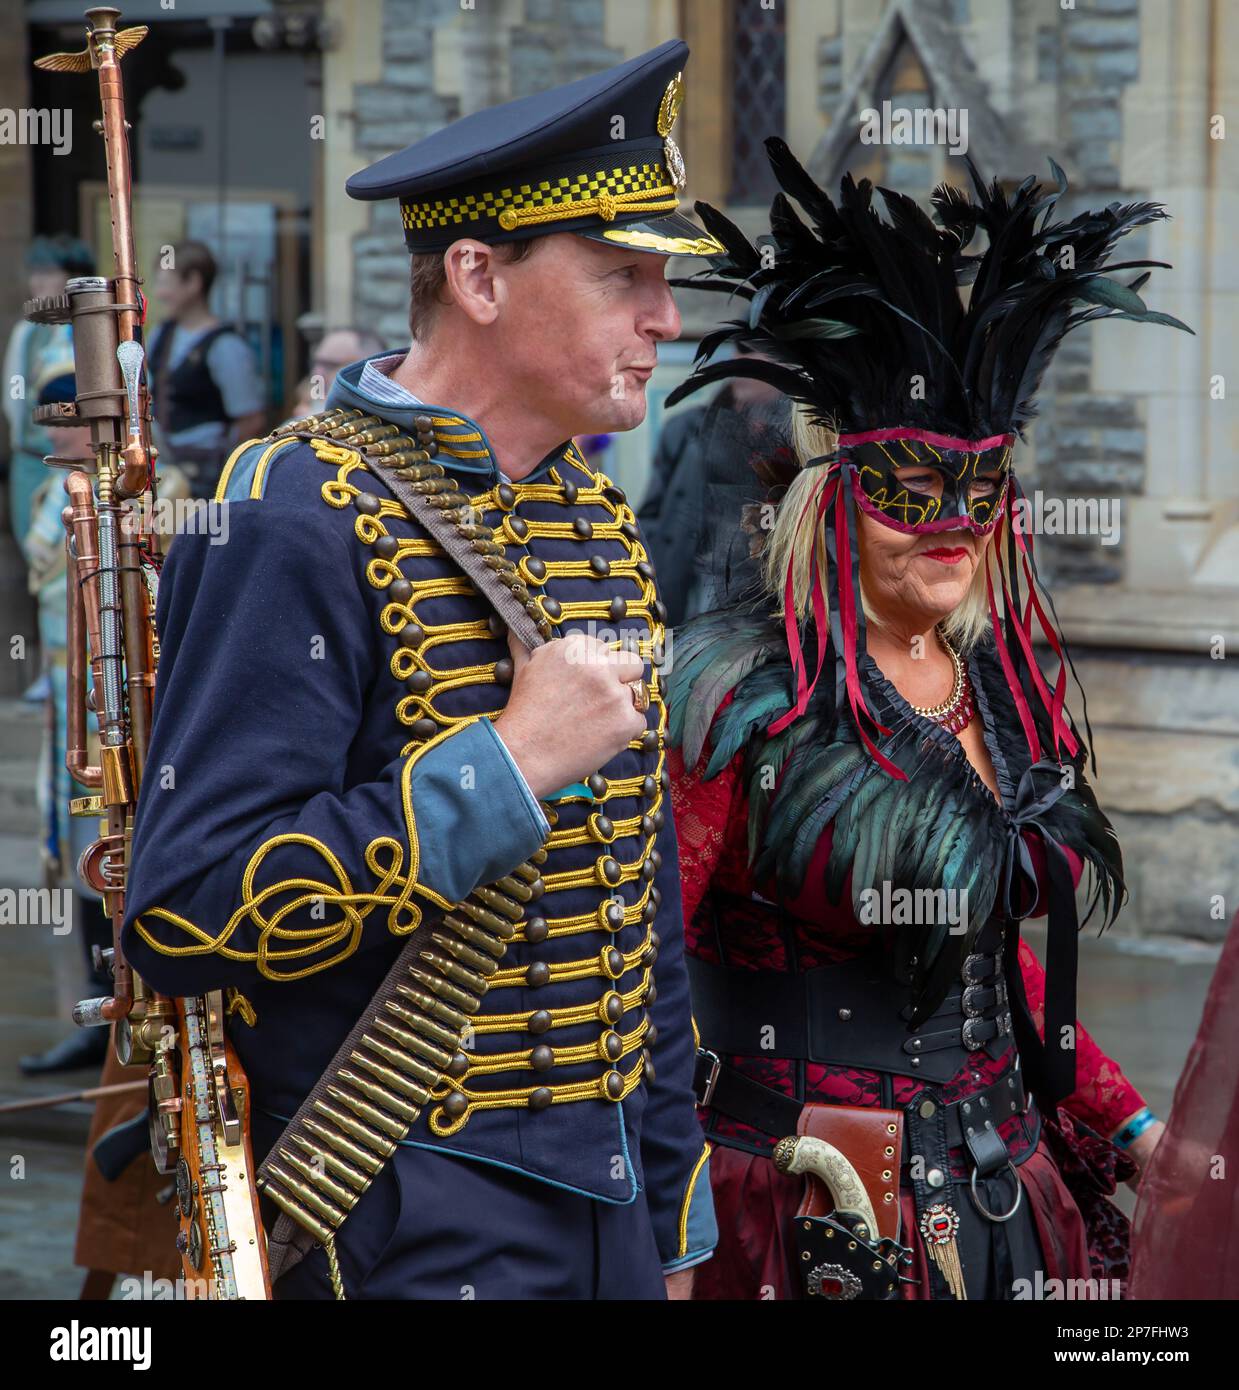 A male and female steampunk. The man is wearing a military style uniform and is carrying a weapon. The woman is wearing a feather headdress and a mask. Stock Photo